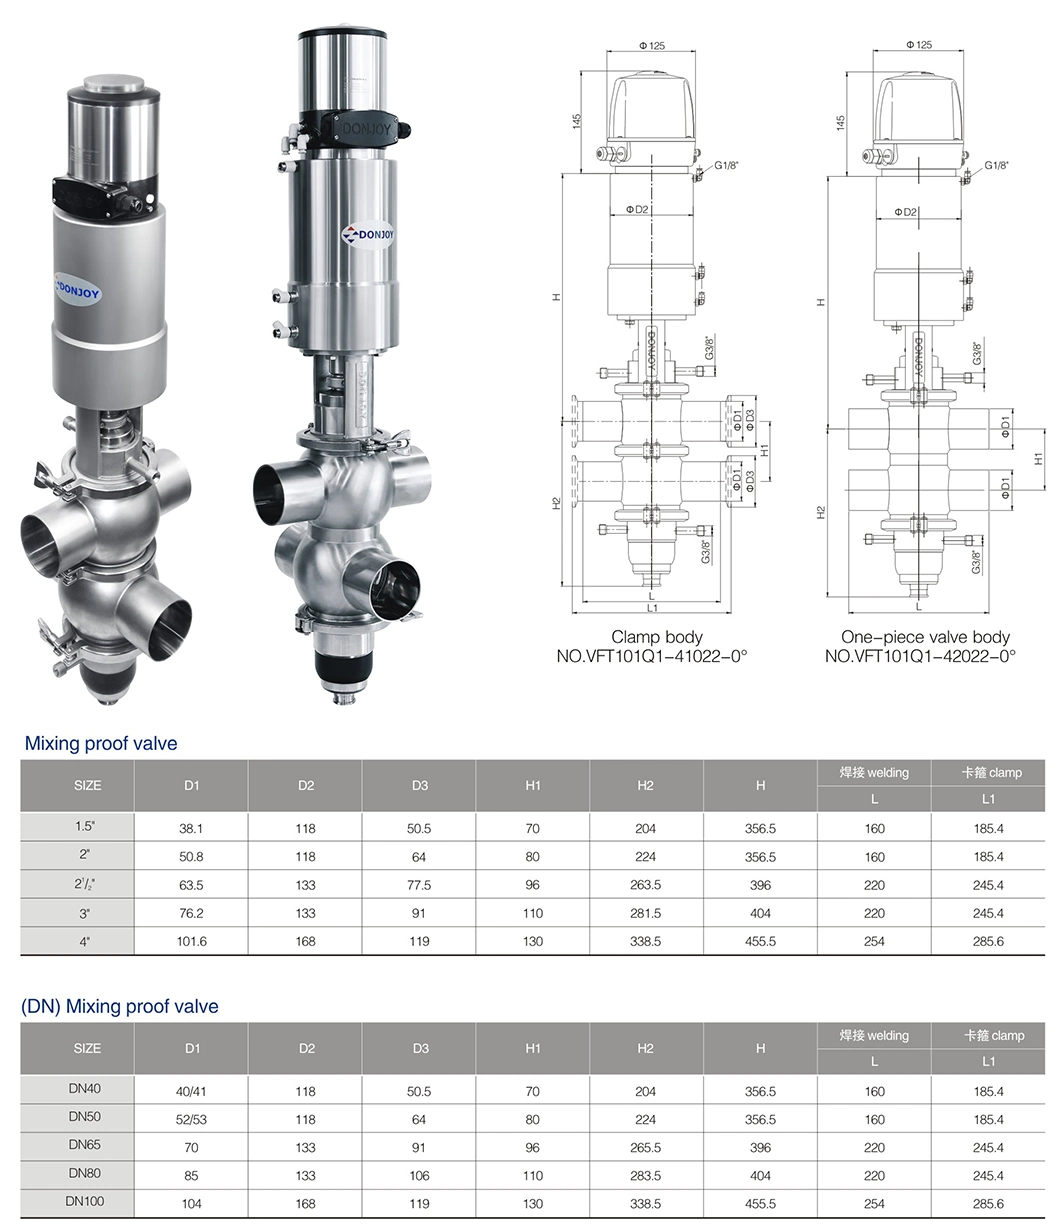 3A Sanitary Air Actuated Double Seat Mix Proof Shut-off Valves for Food Beverage Processing Diary Industries